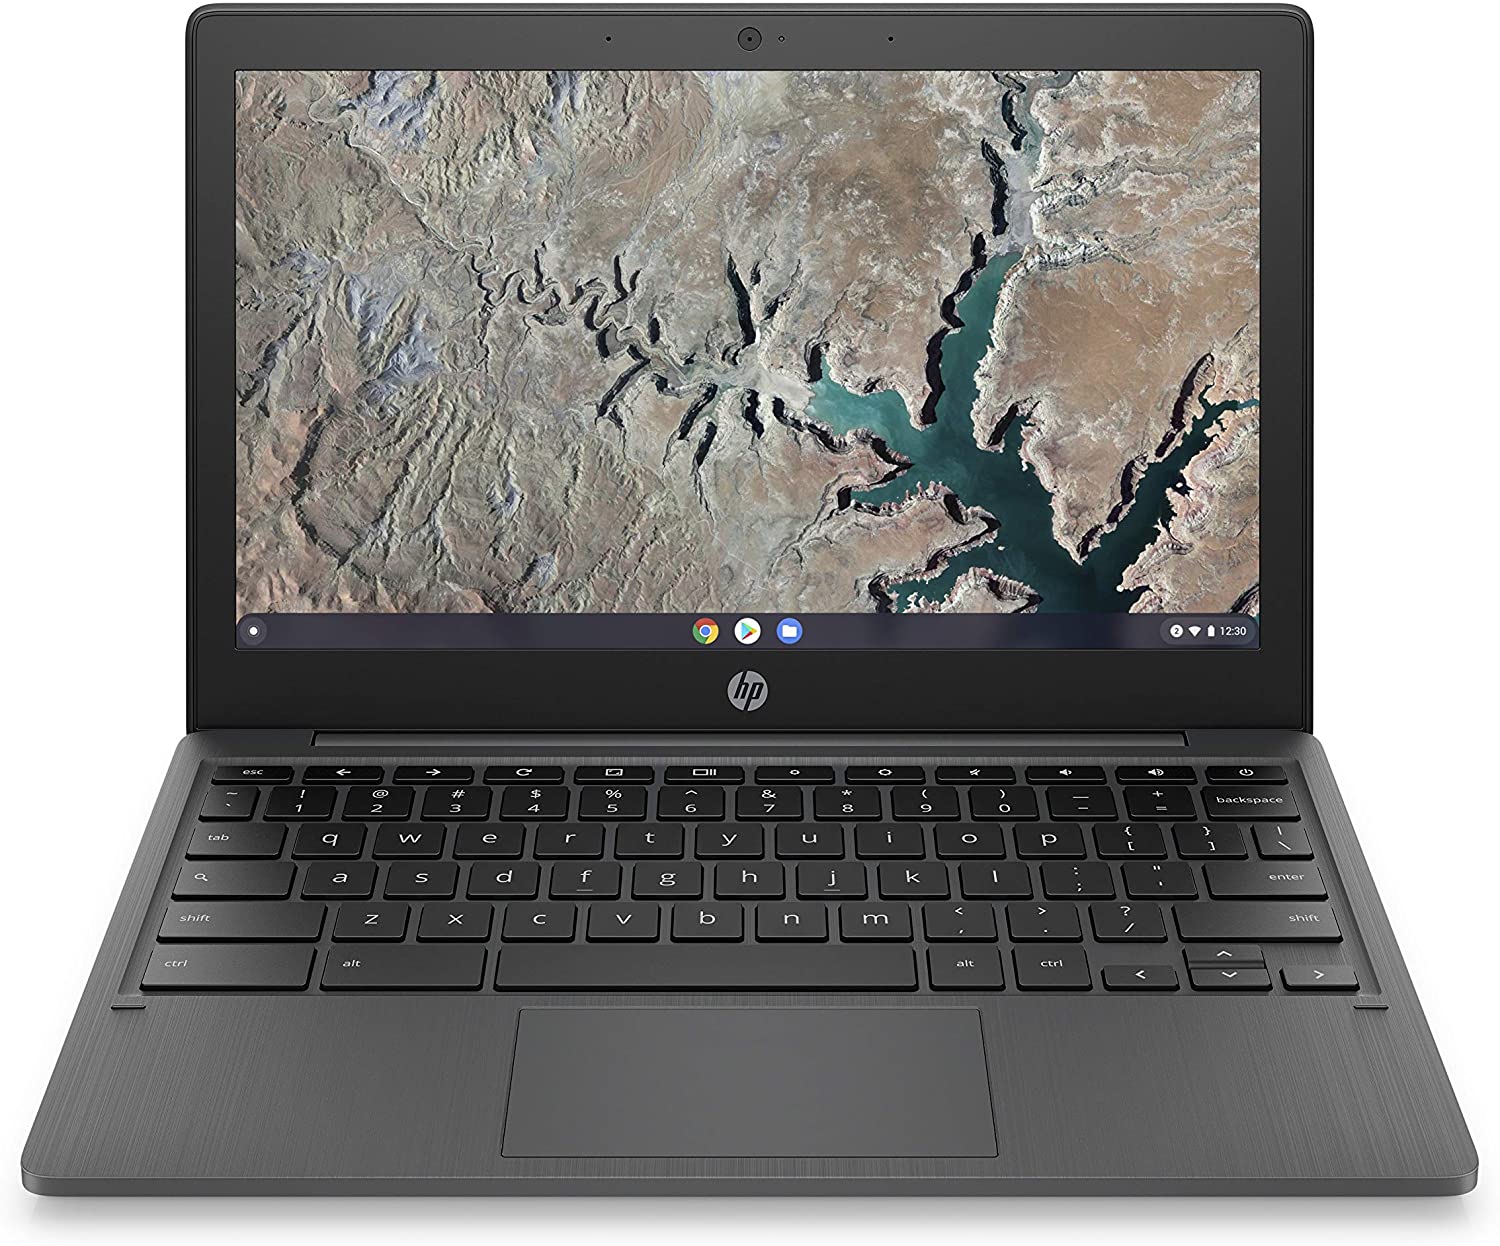 The chip inside the Lenovo Duet Chromebook powers the new $259 HP Chromebook 11a